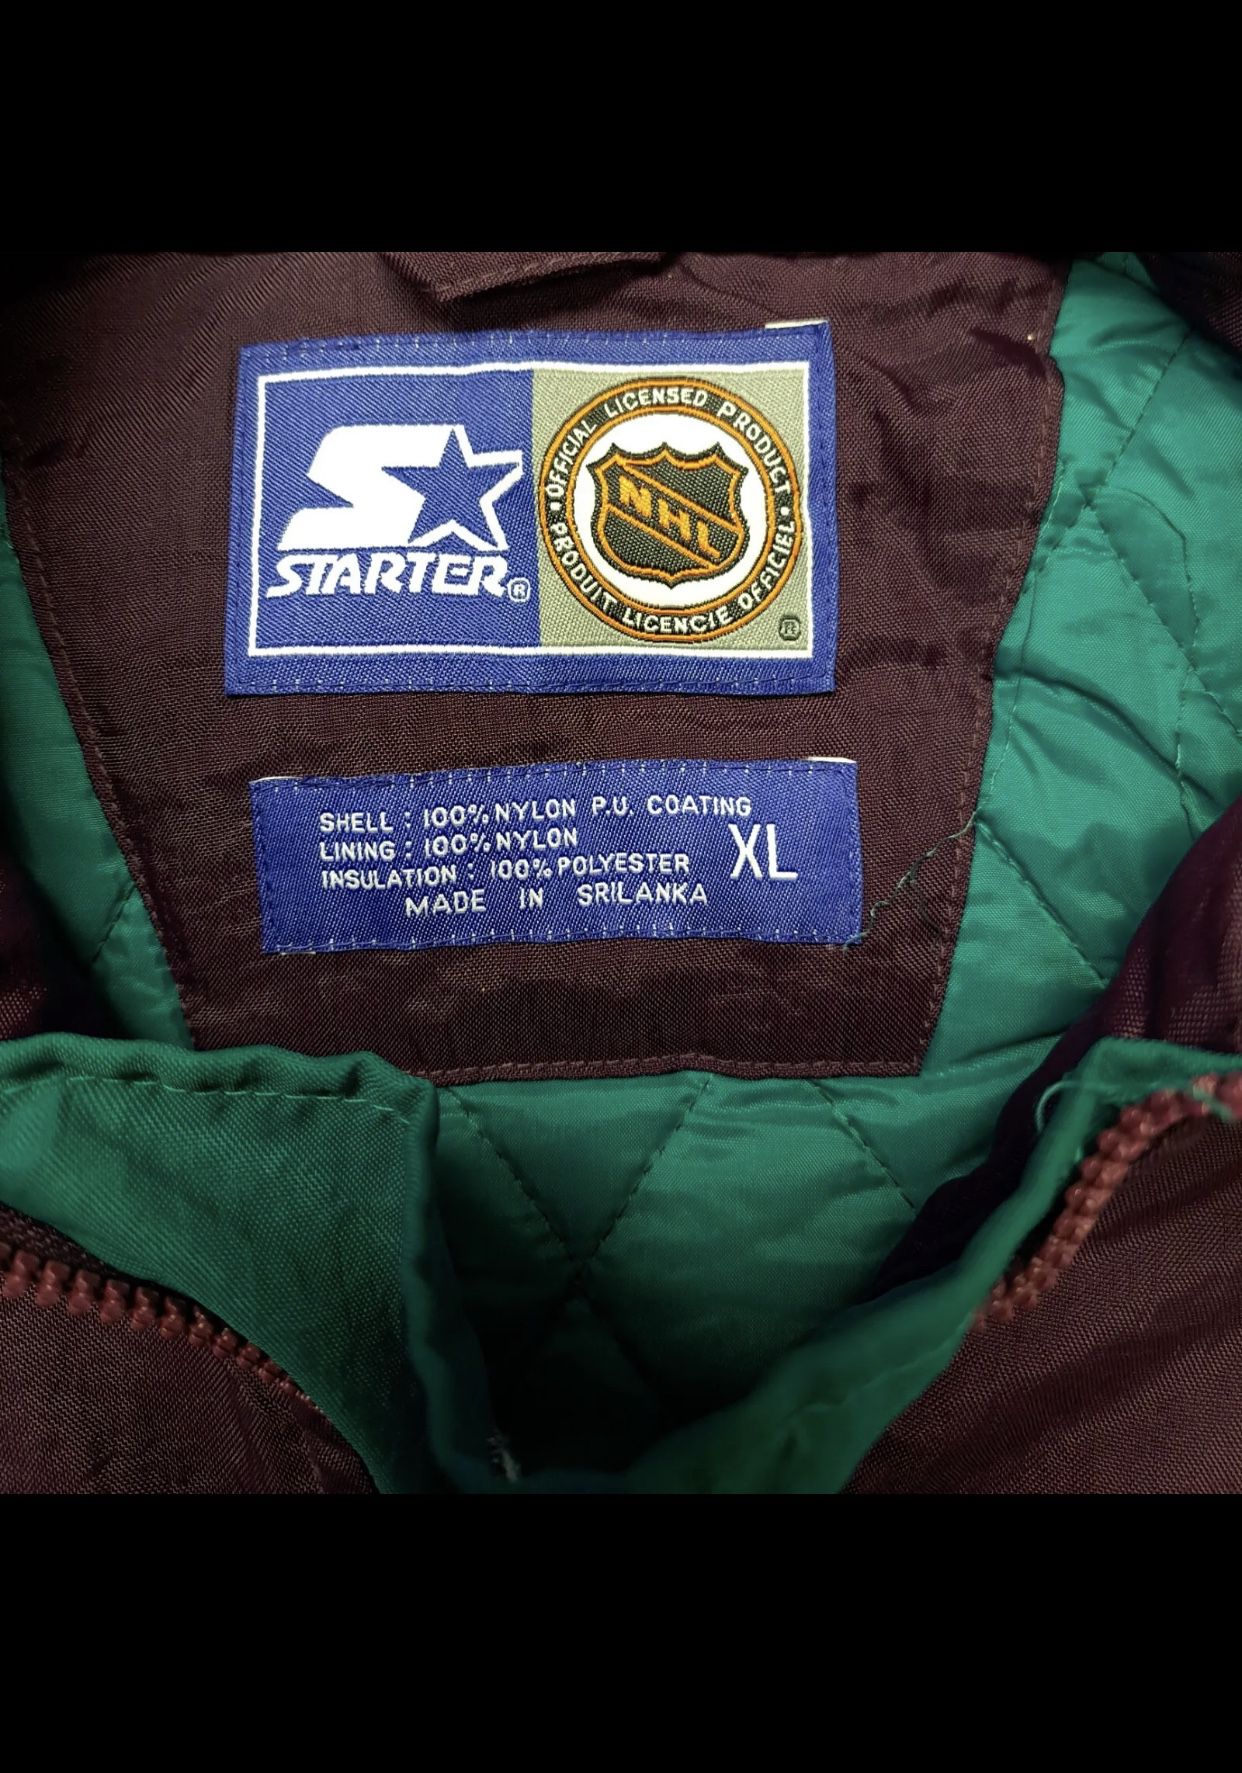 Mighty Ducks Jacket for Sale in Loma Linda, CA - OfferUp